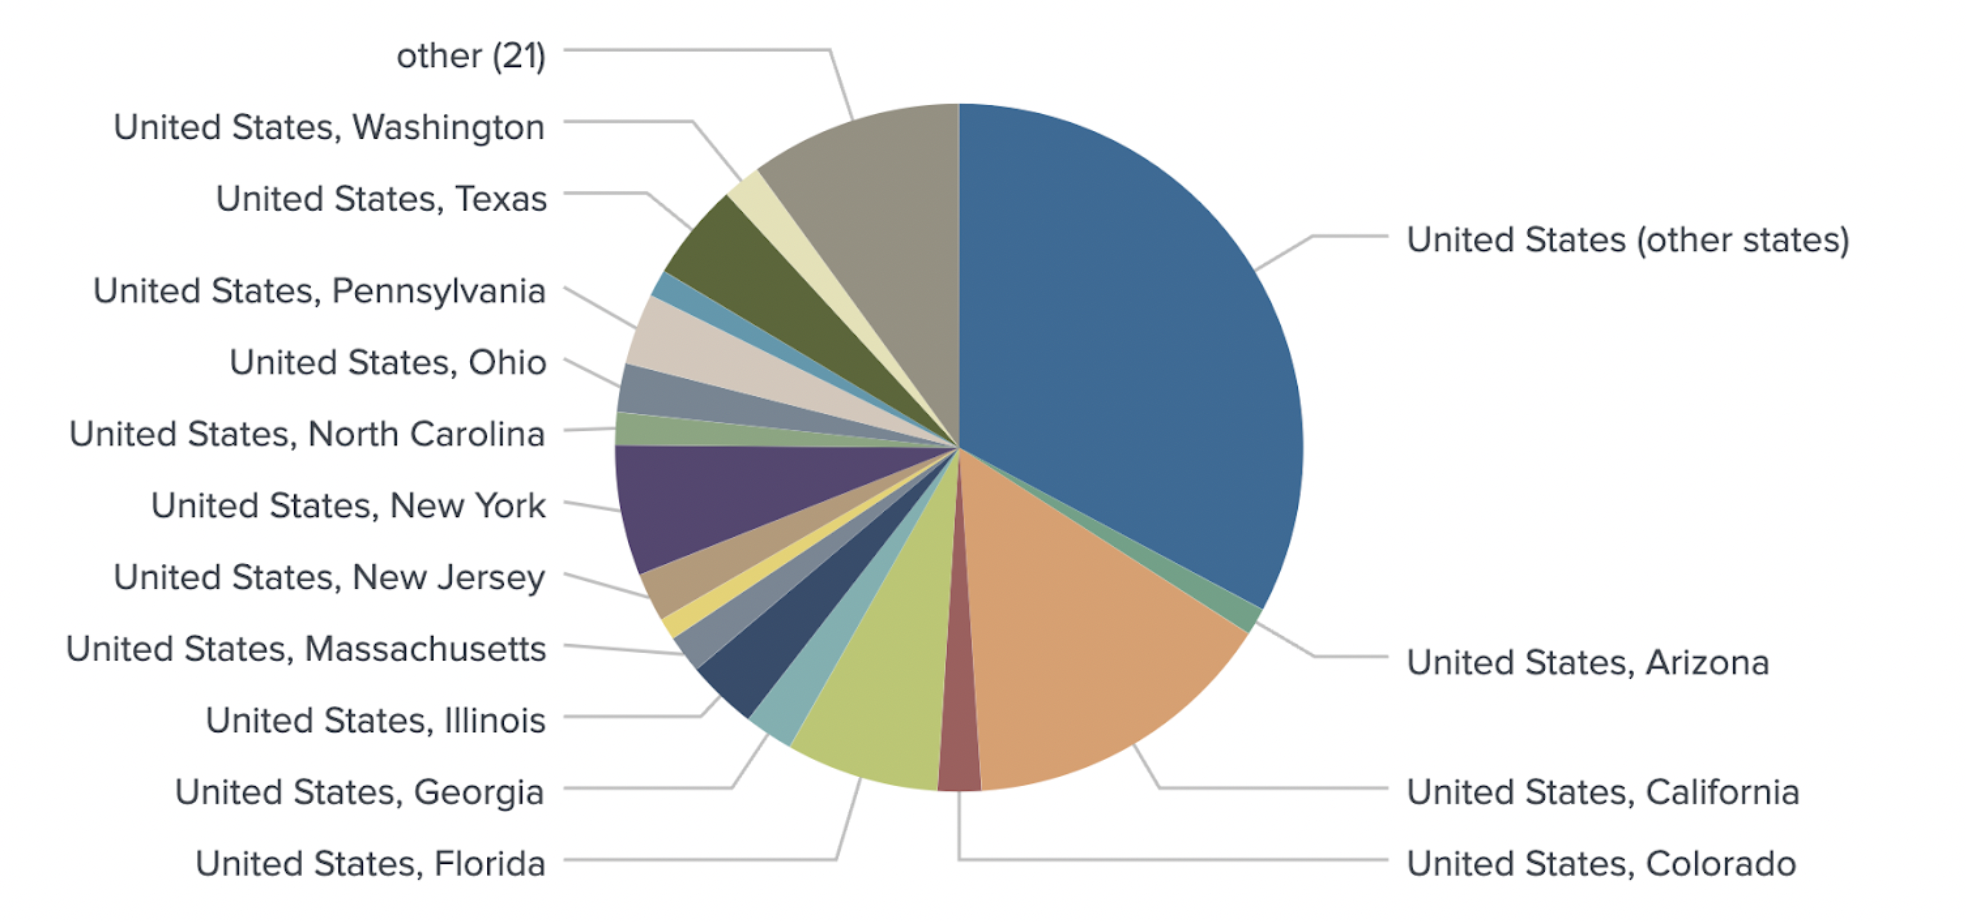 Geolocation breakdown of users from the US